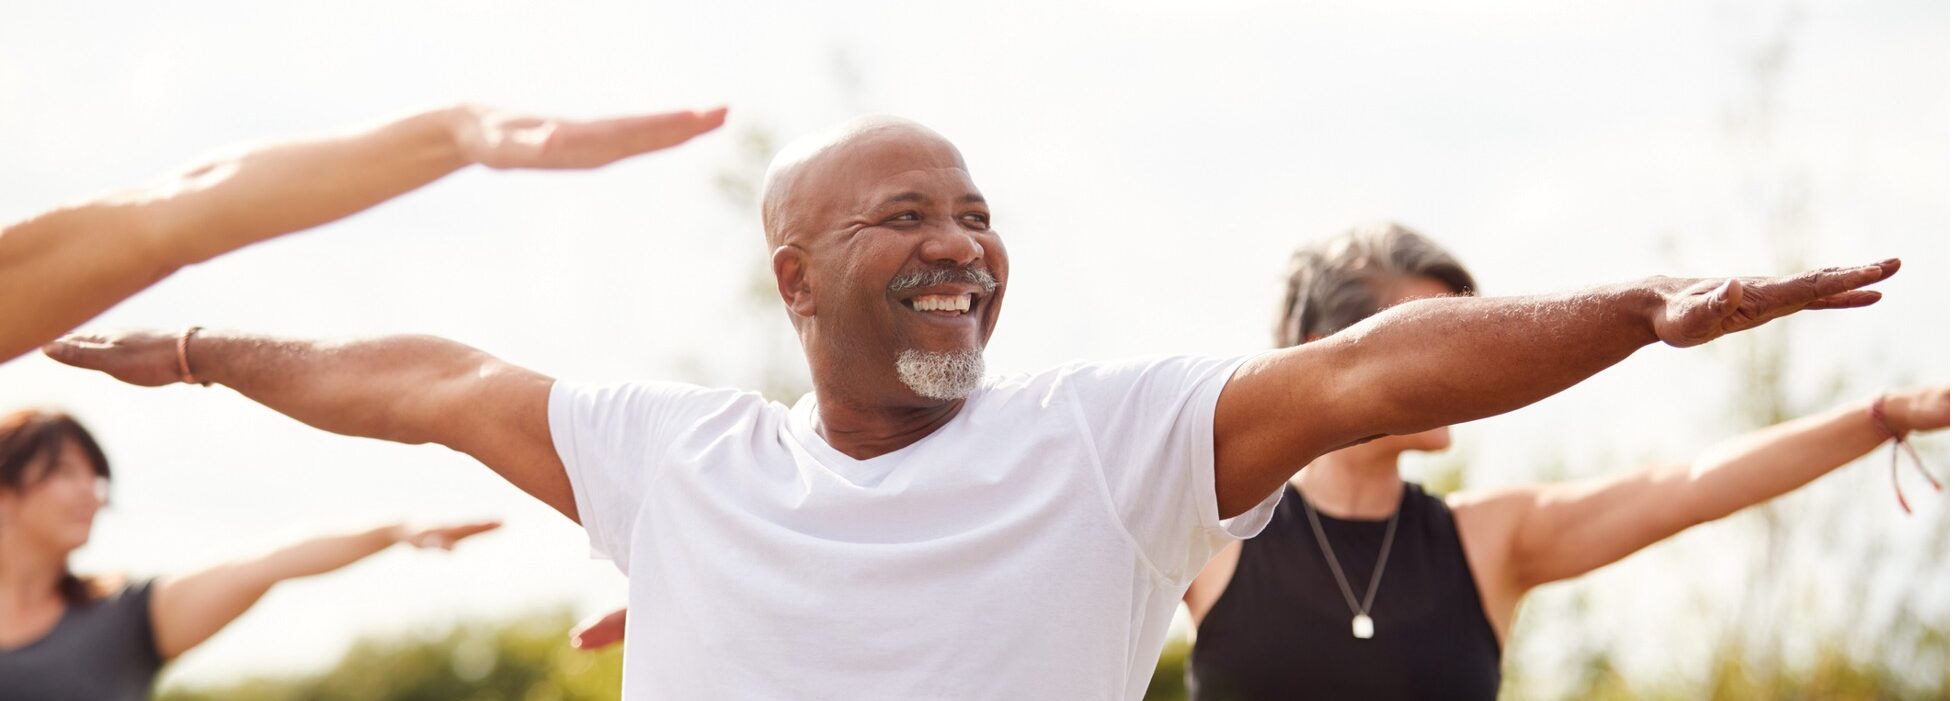 A smiling, middle aged African American man performs yoga in a park.